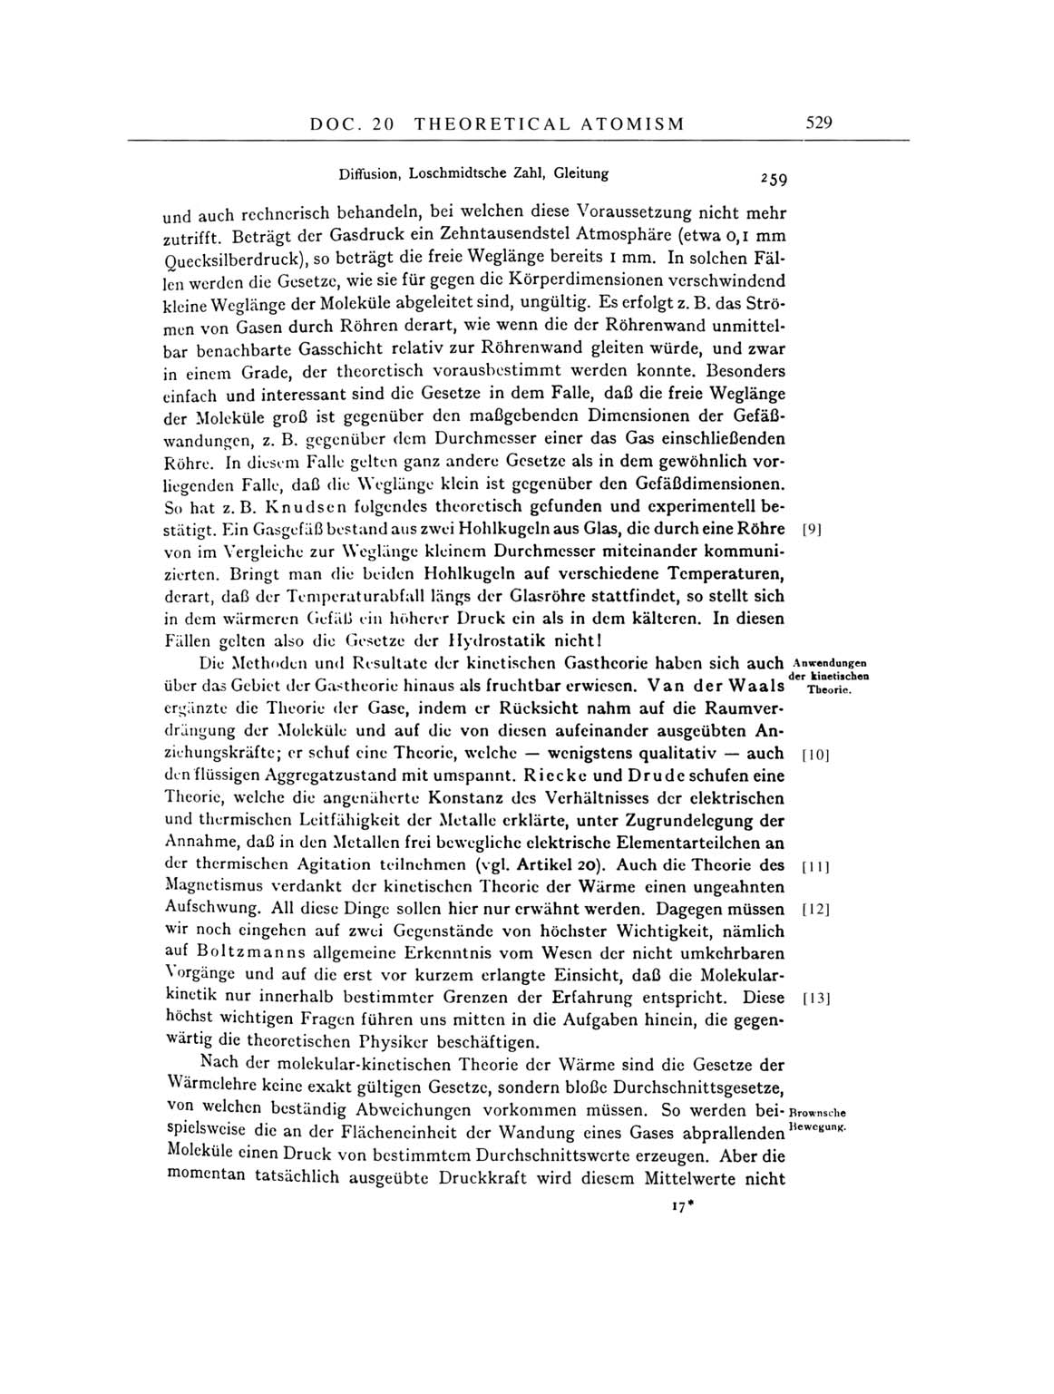 Volume 4: The Swiss Years: Writings 1912-1914 page 529